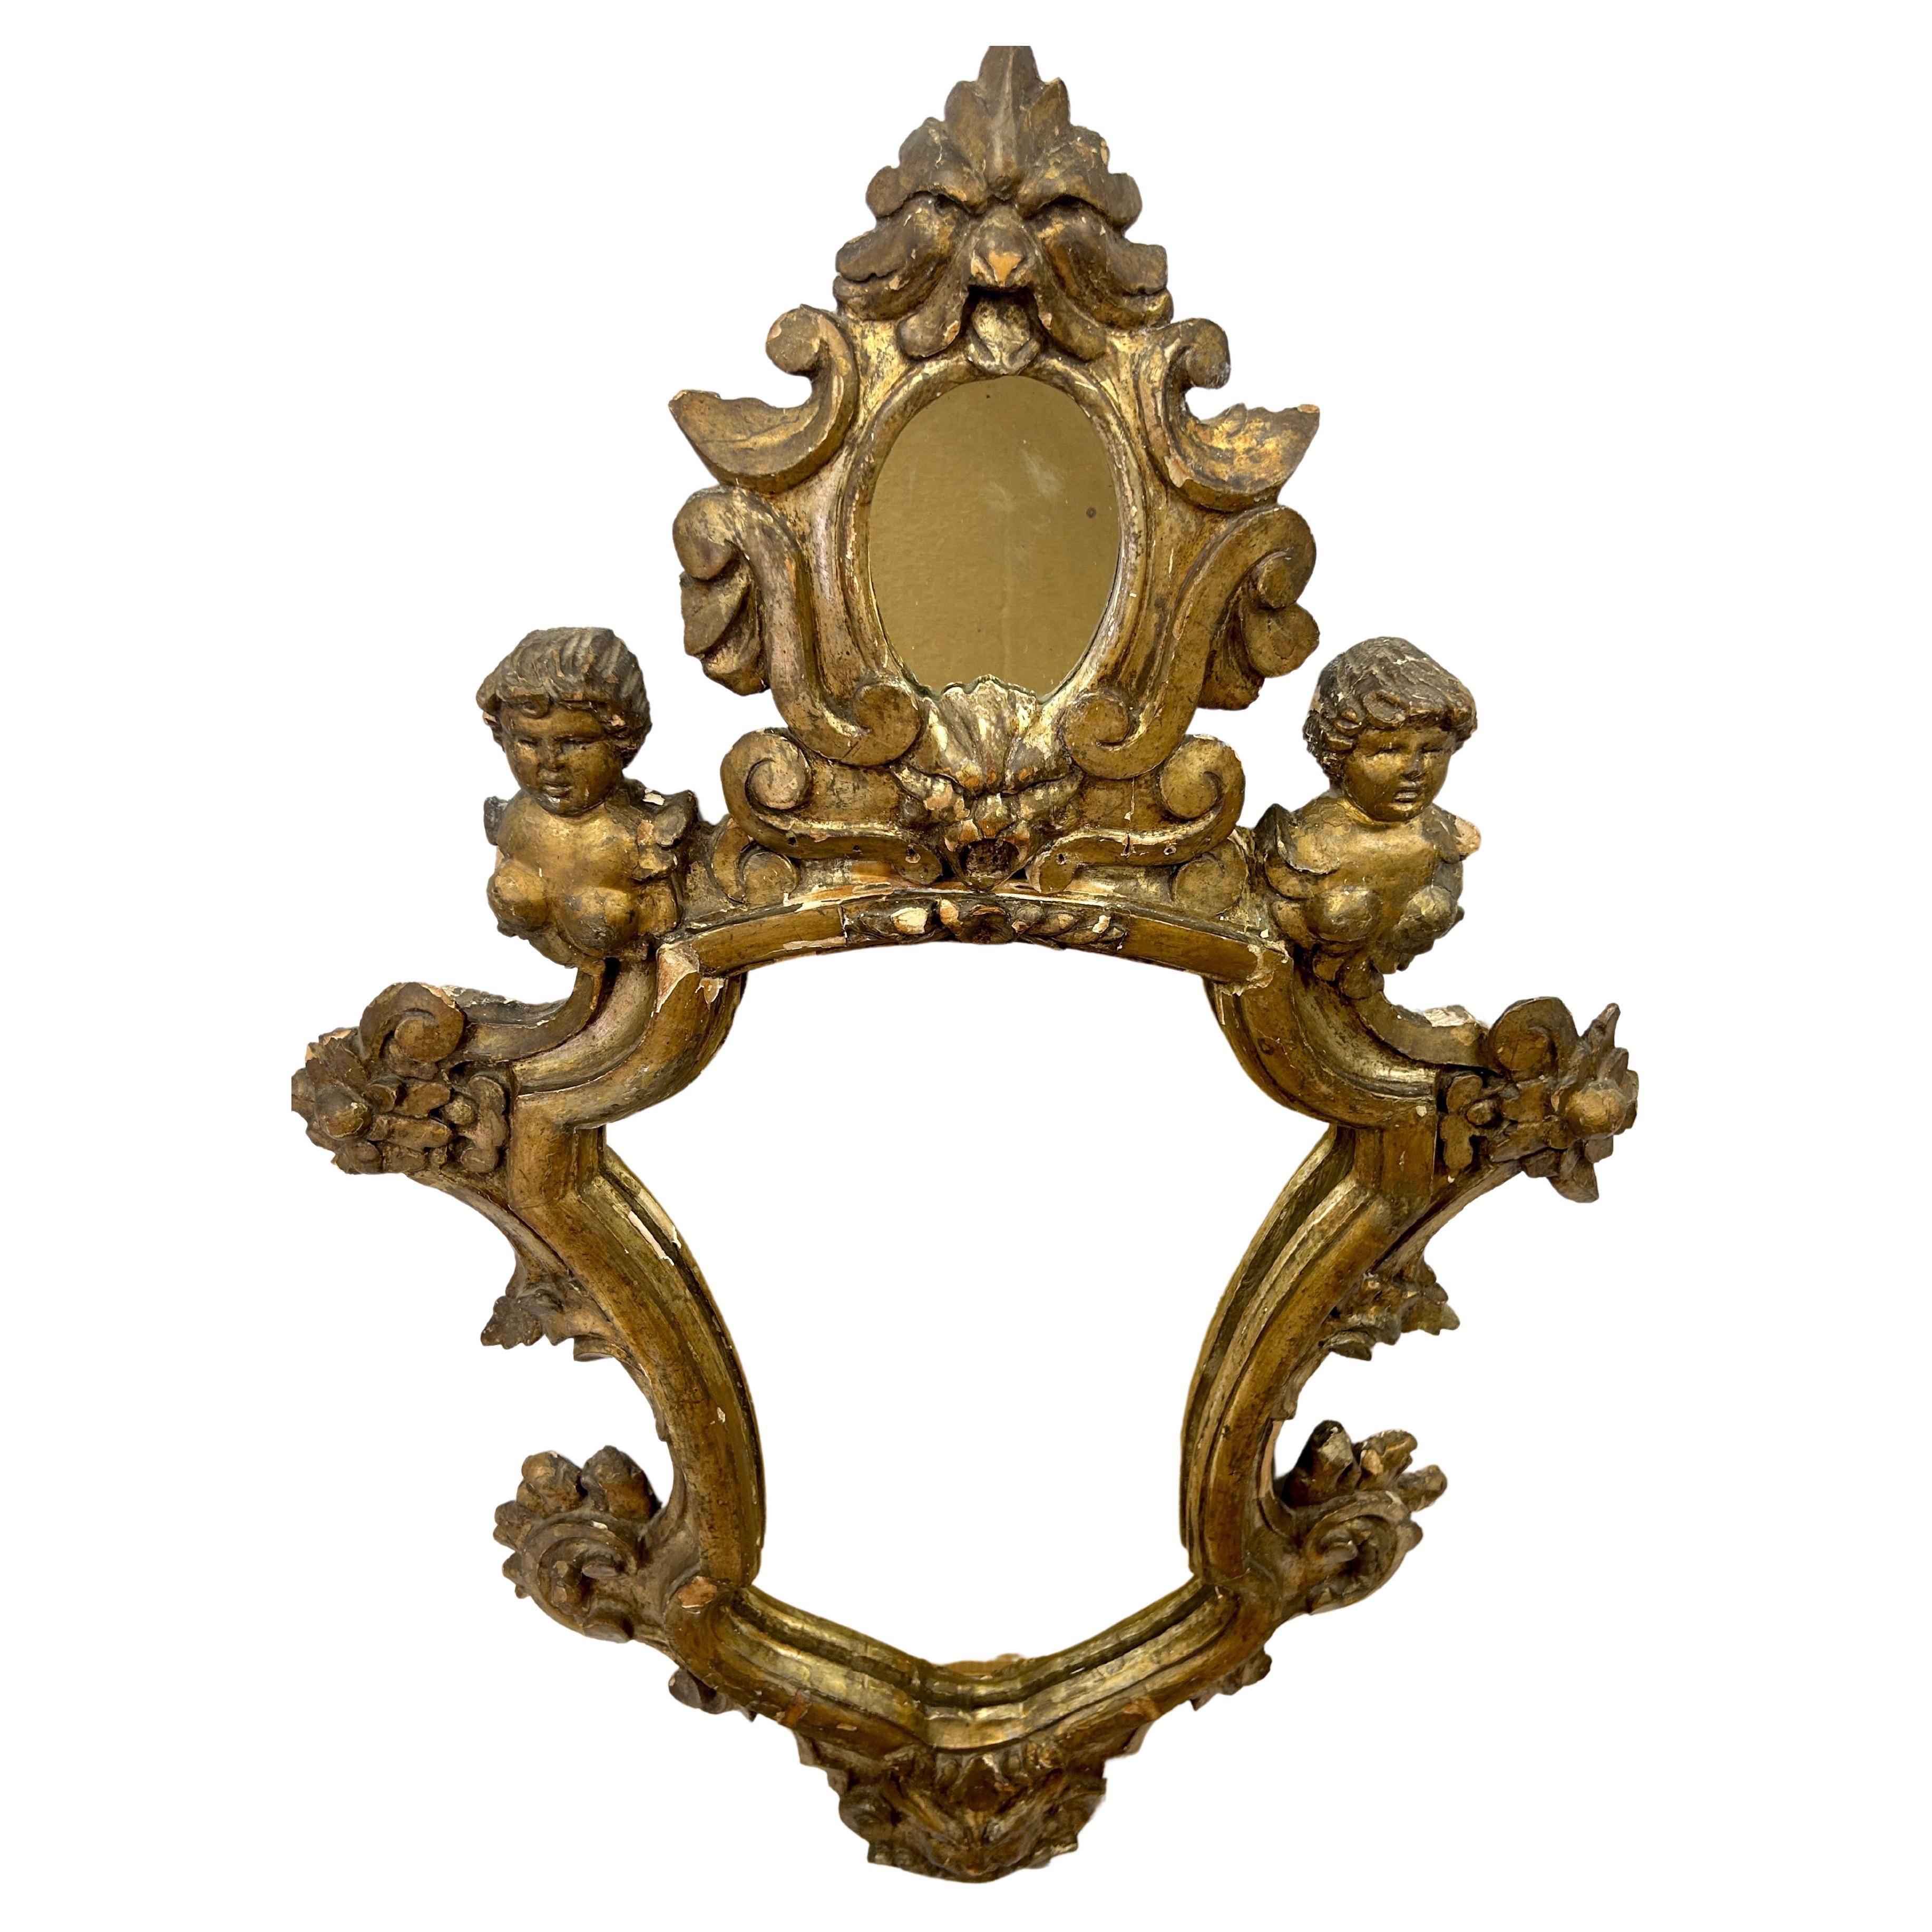 Large Italian baroque style giltwood wall mirror with cherubs and foliate carved surround. Has small oval mirror surrounded by intricate carved giltwood atop a larger mirror with gilt floral carving terminating into giltwood animal face.